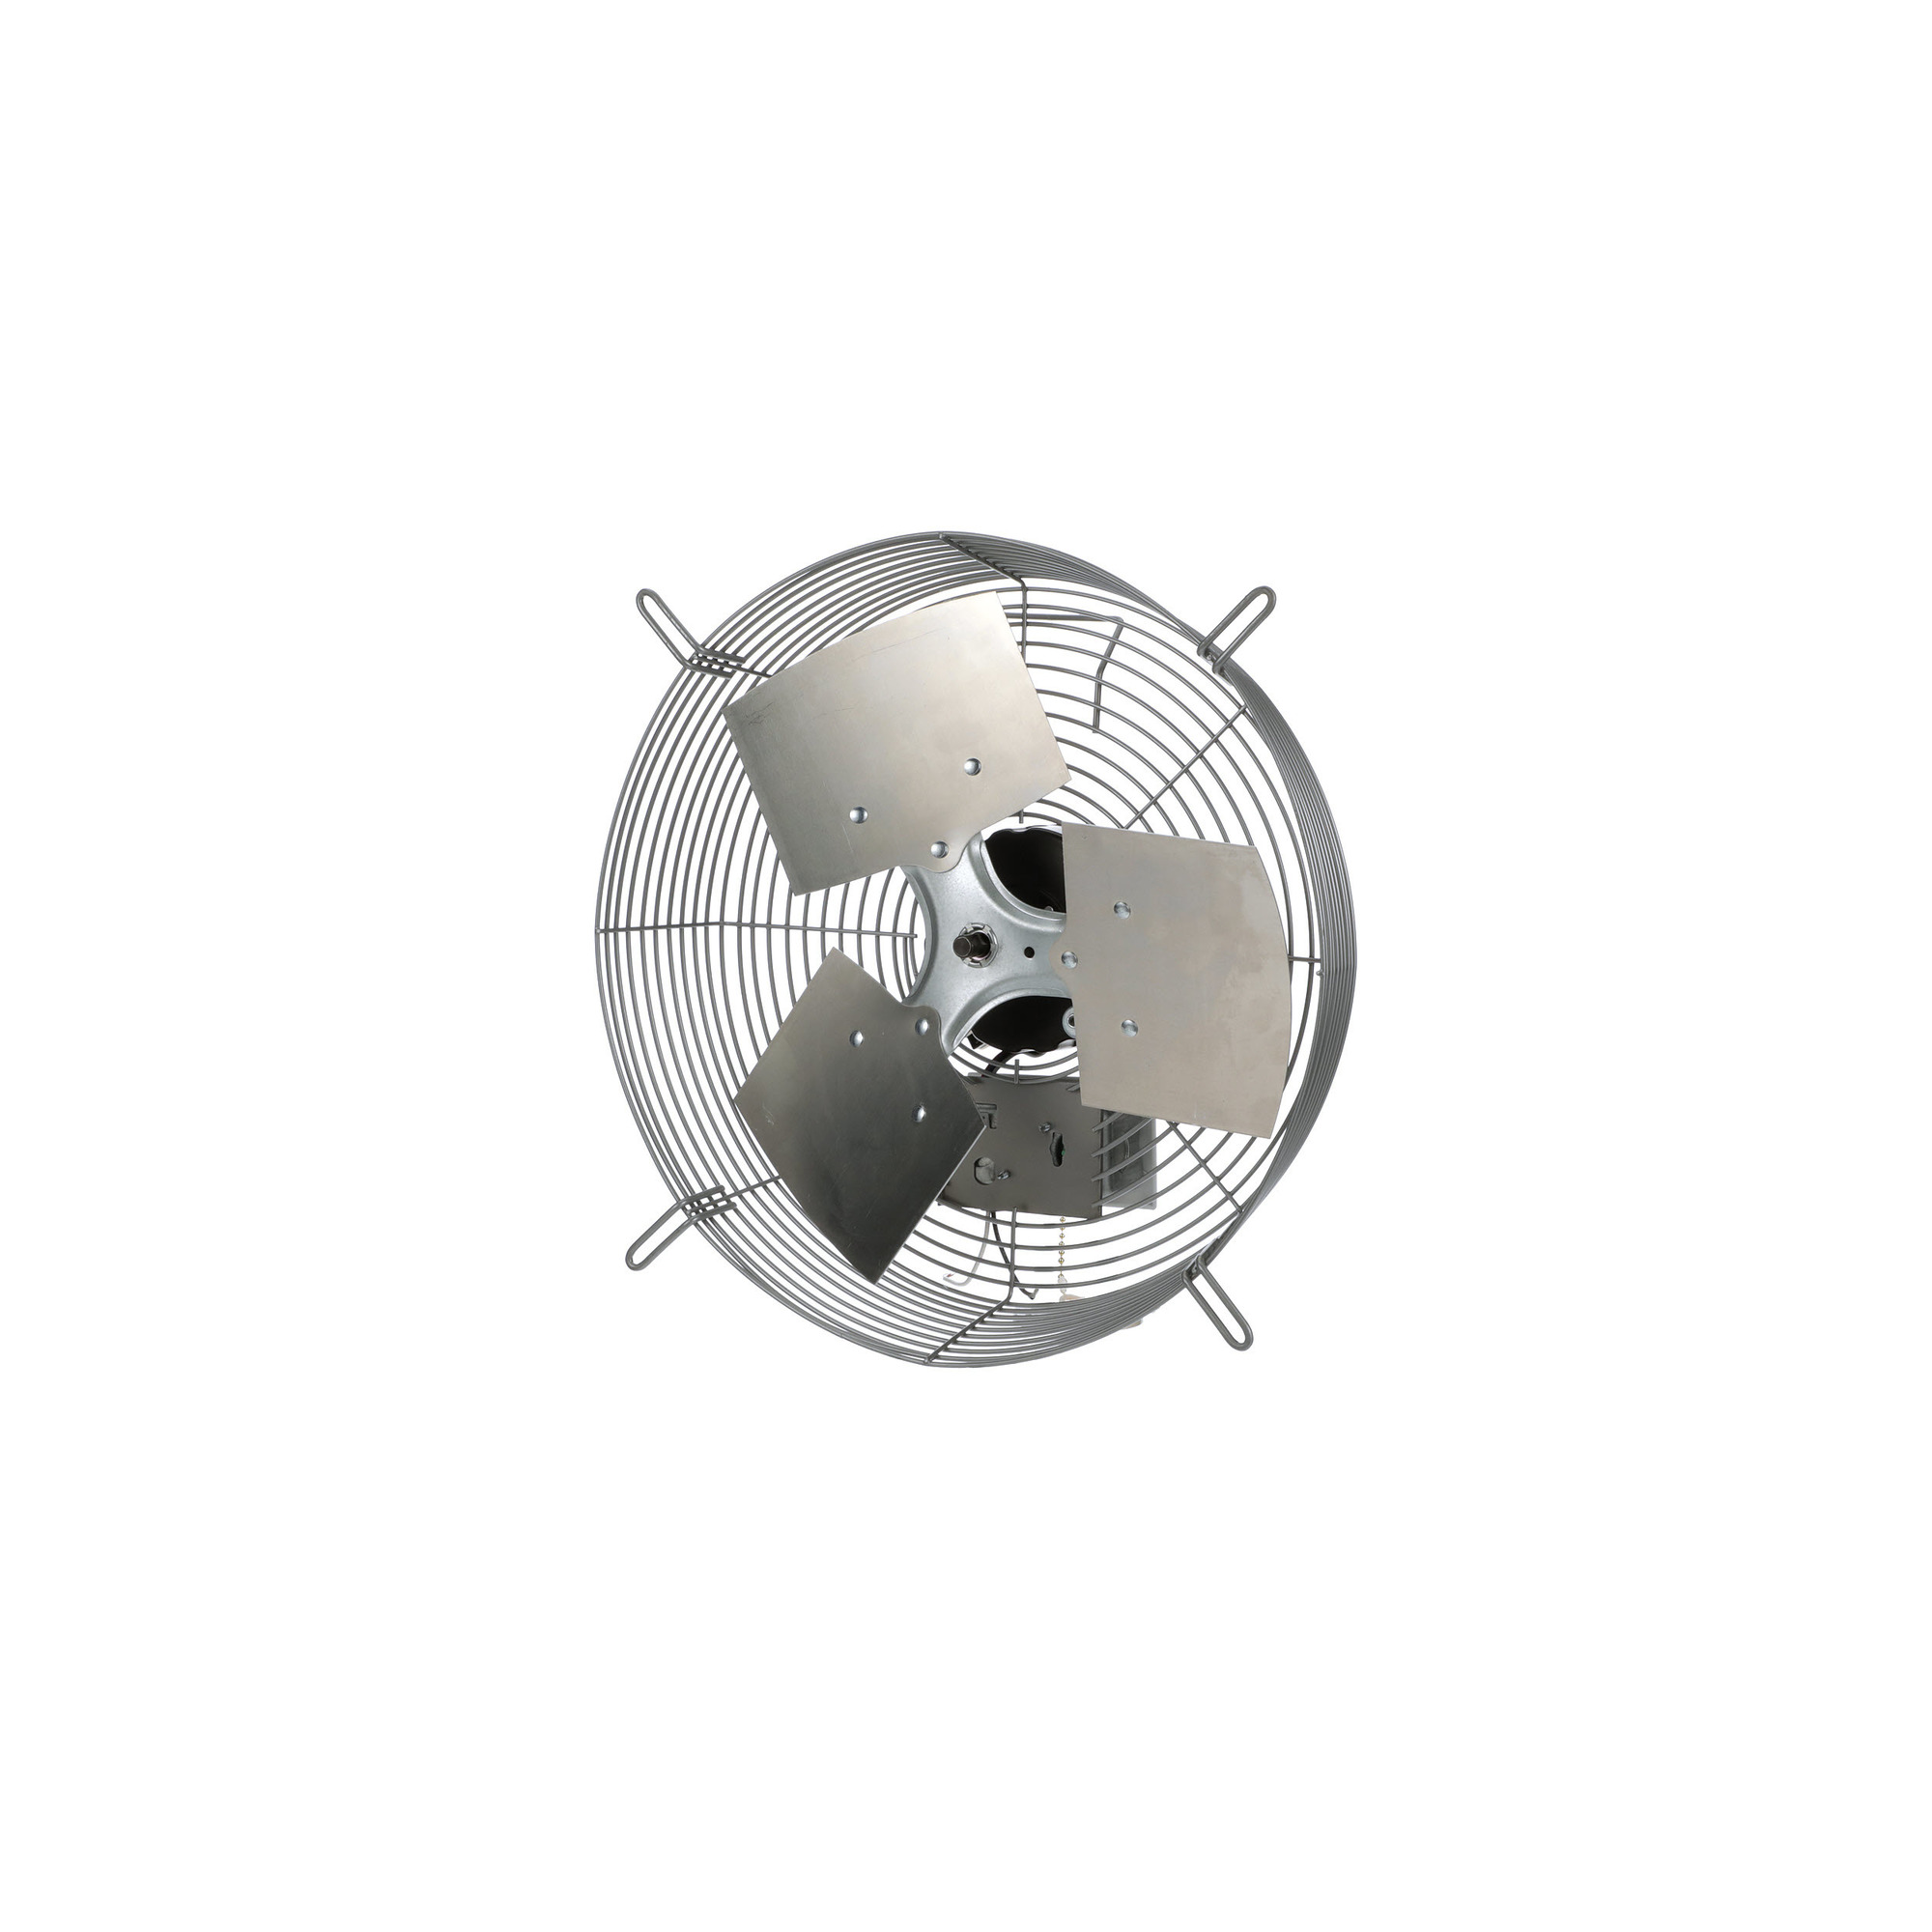 TPI, Guard-Mounted Exhaust Fan, Drive Type Direct, Fan Diameter 16 in, Air Delivery 2100 cfm, Model CE16D